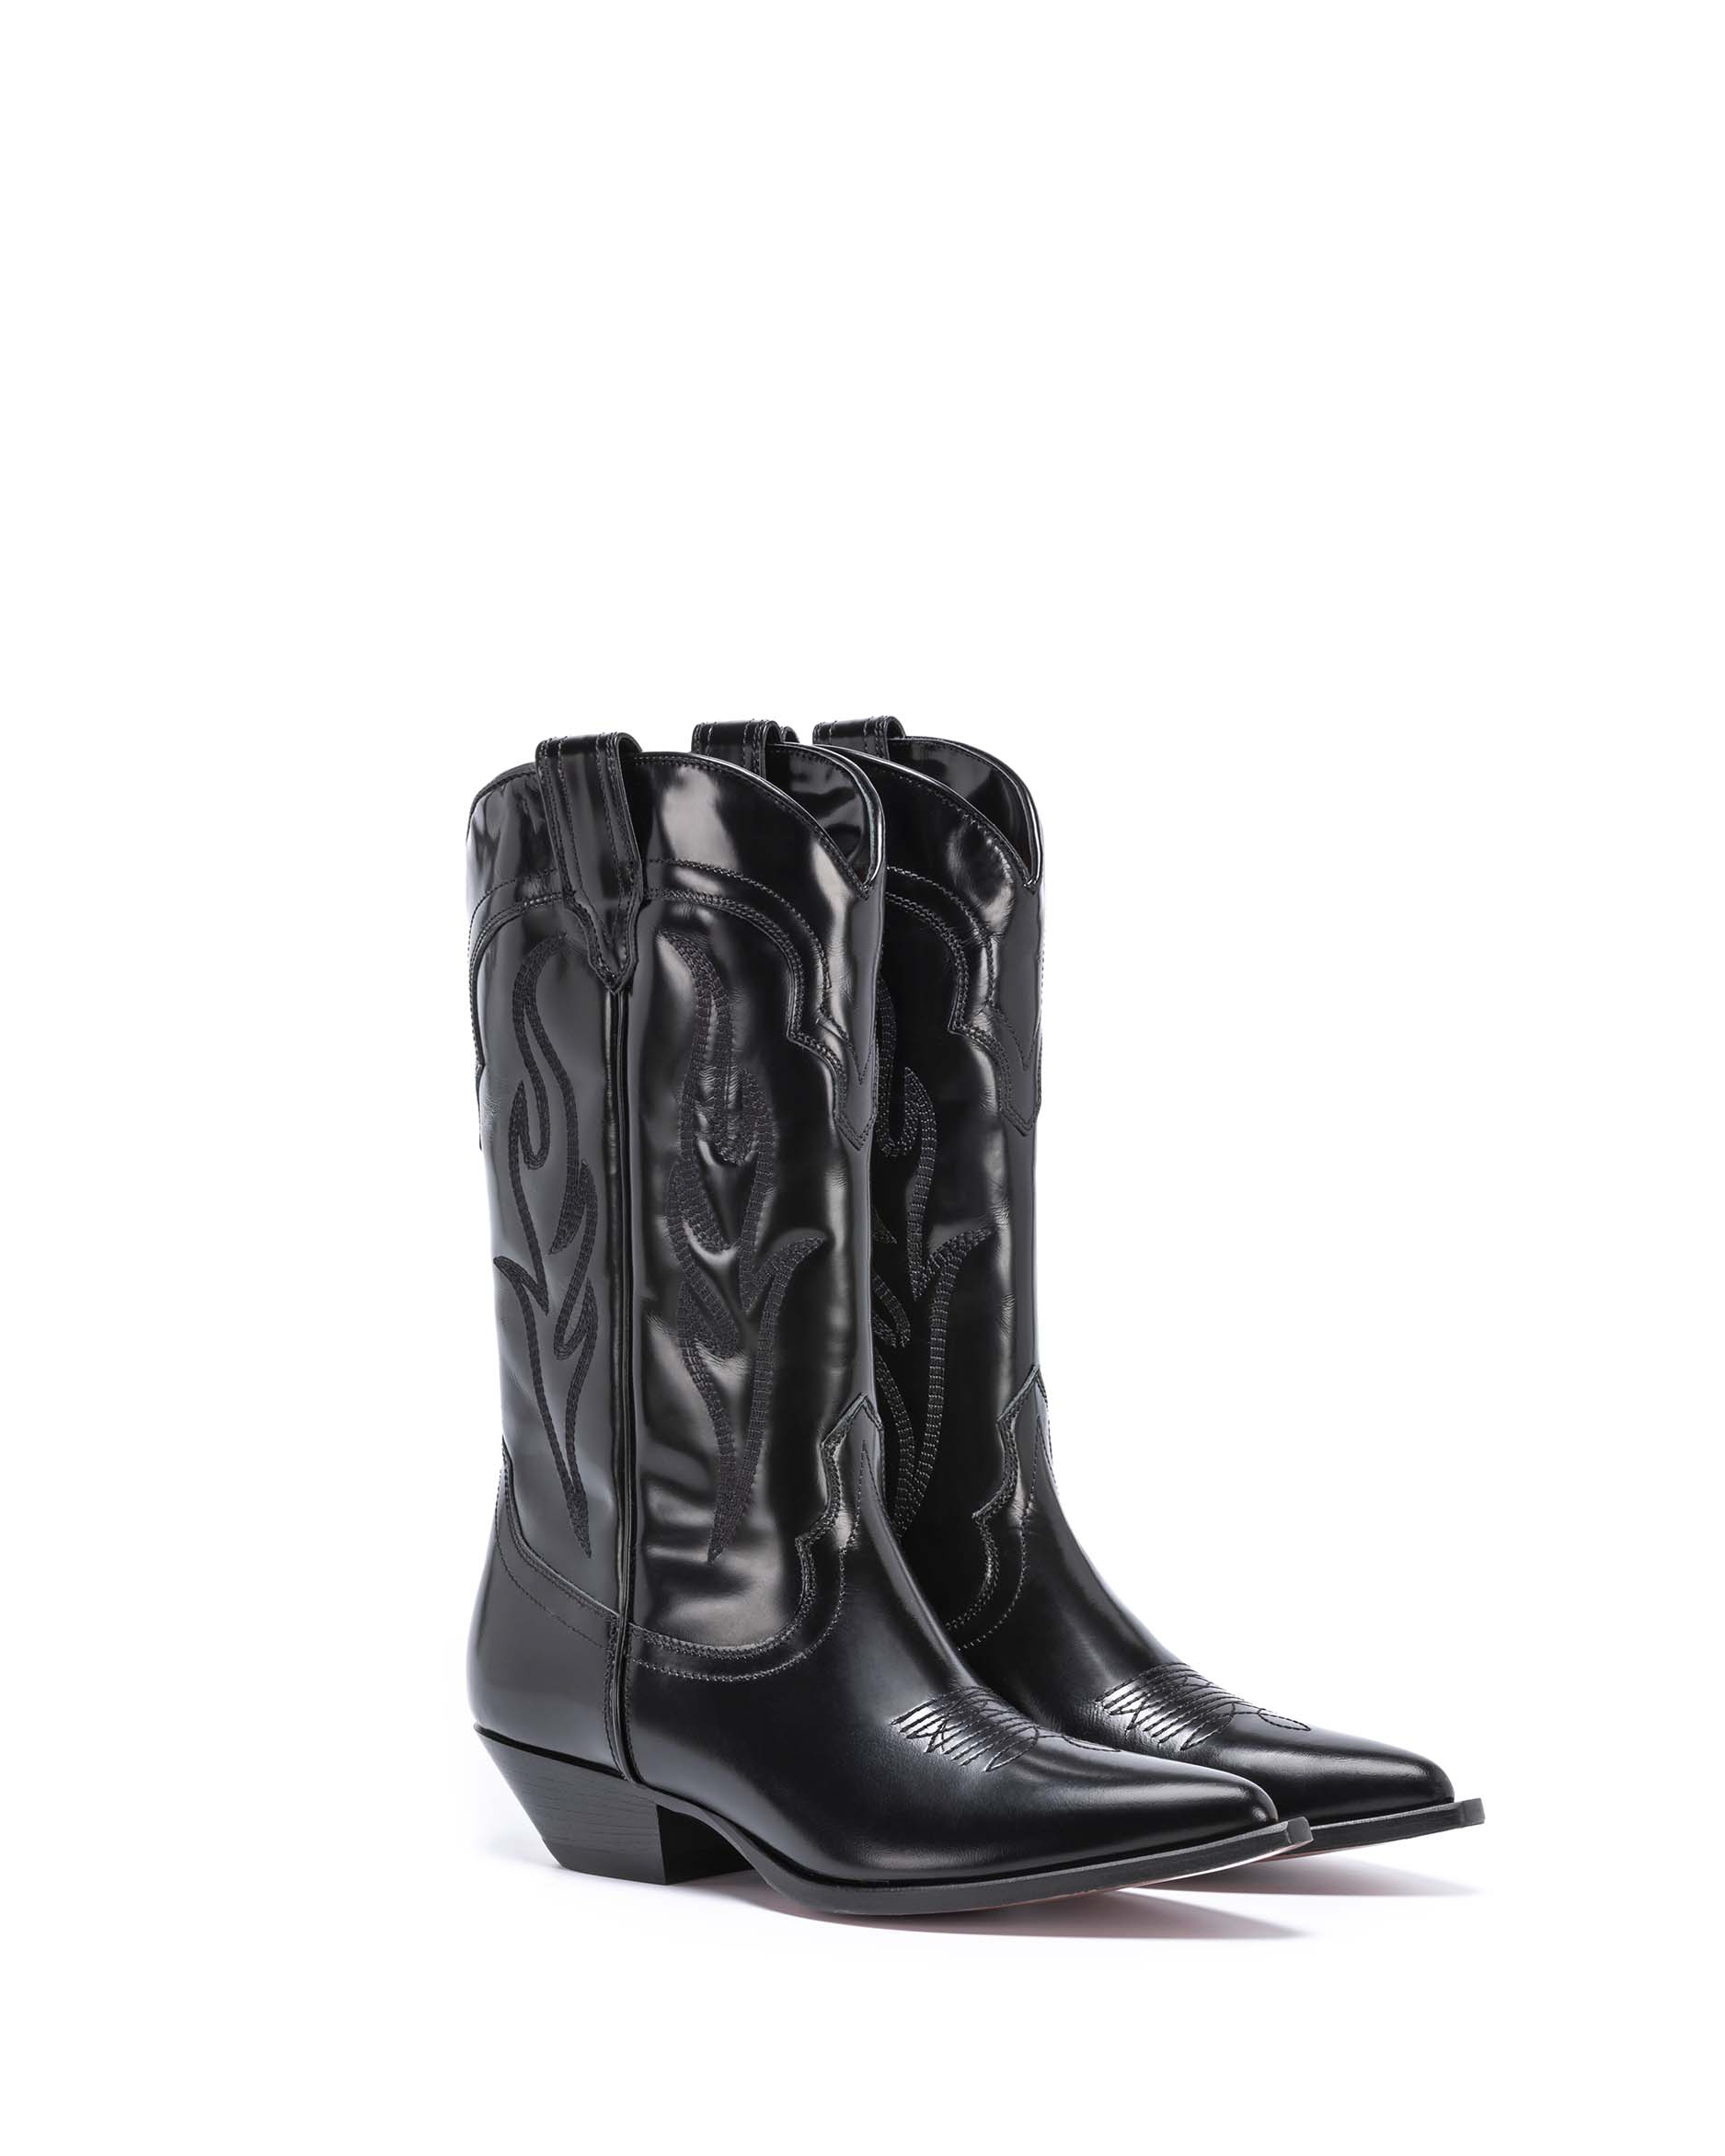 SANTA FE Women's Cowboy Boots in Black Brushed Calfskin | On Tone Embroidery_Front_01